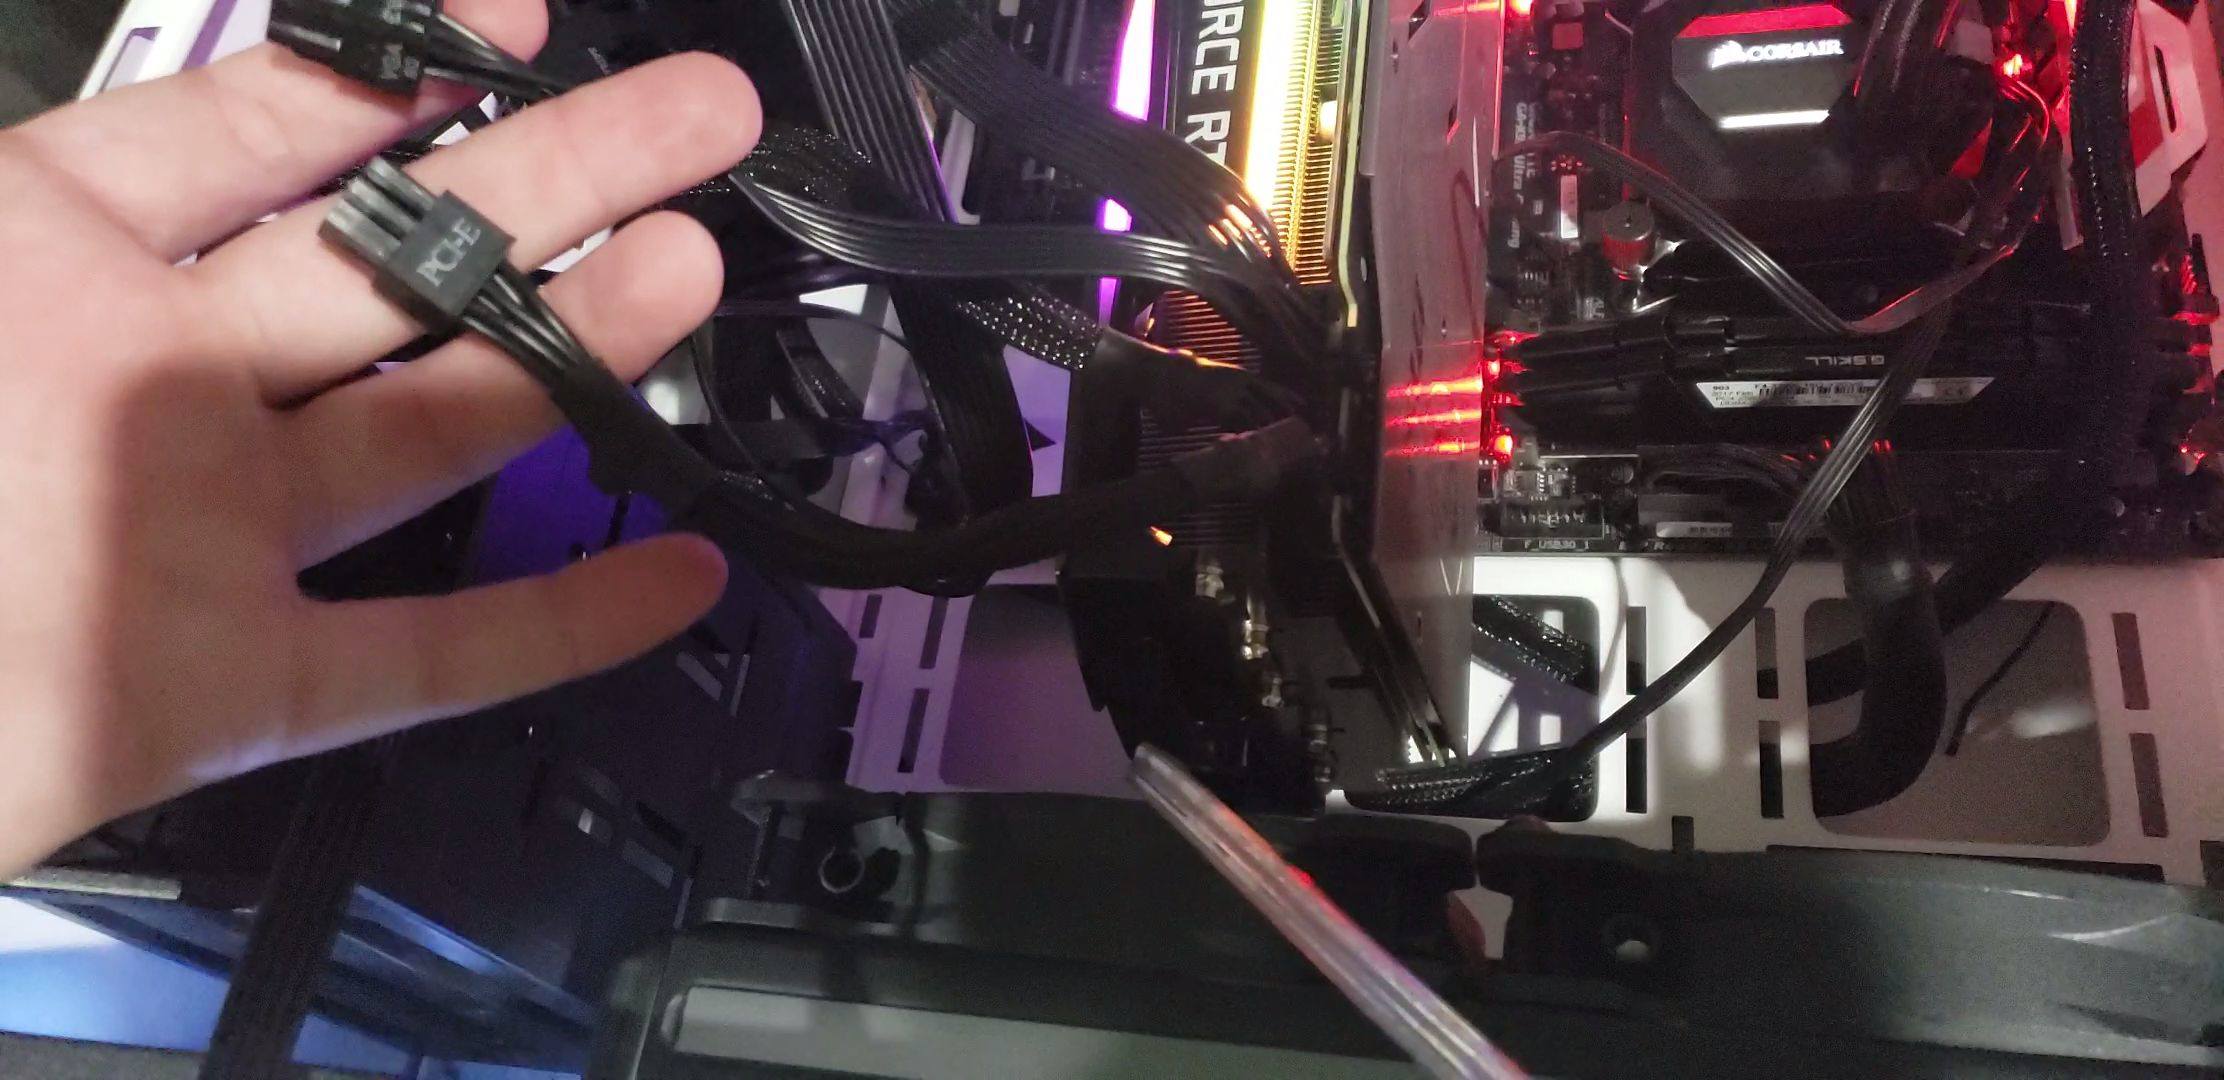 My new Rtx 2070 super has 2x8 pin connectors? - Cards Linus Tech